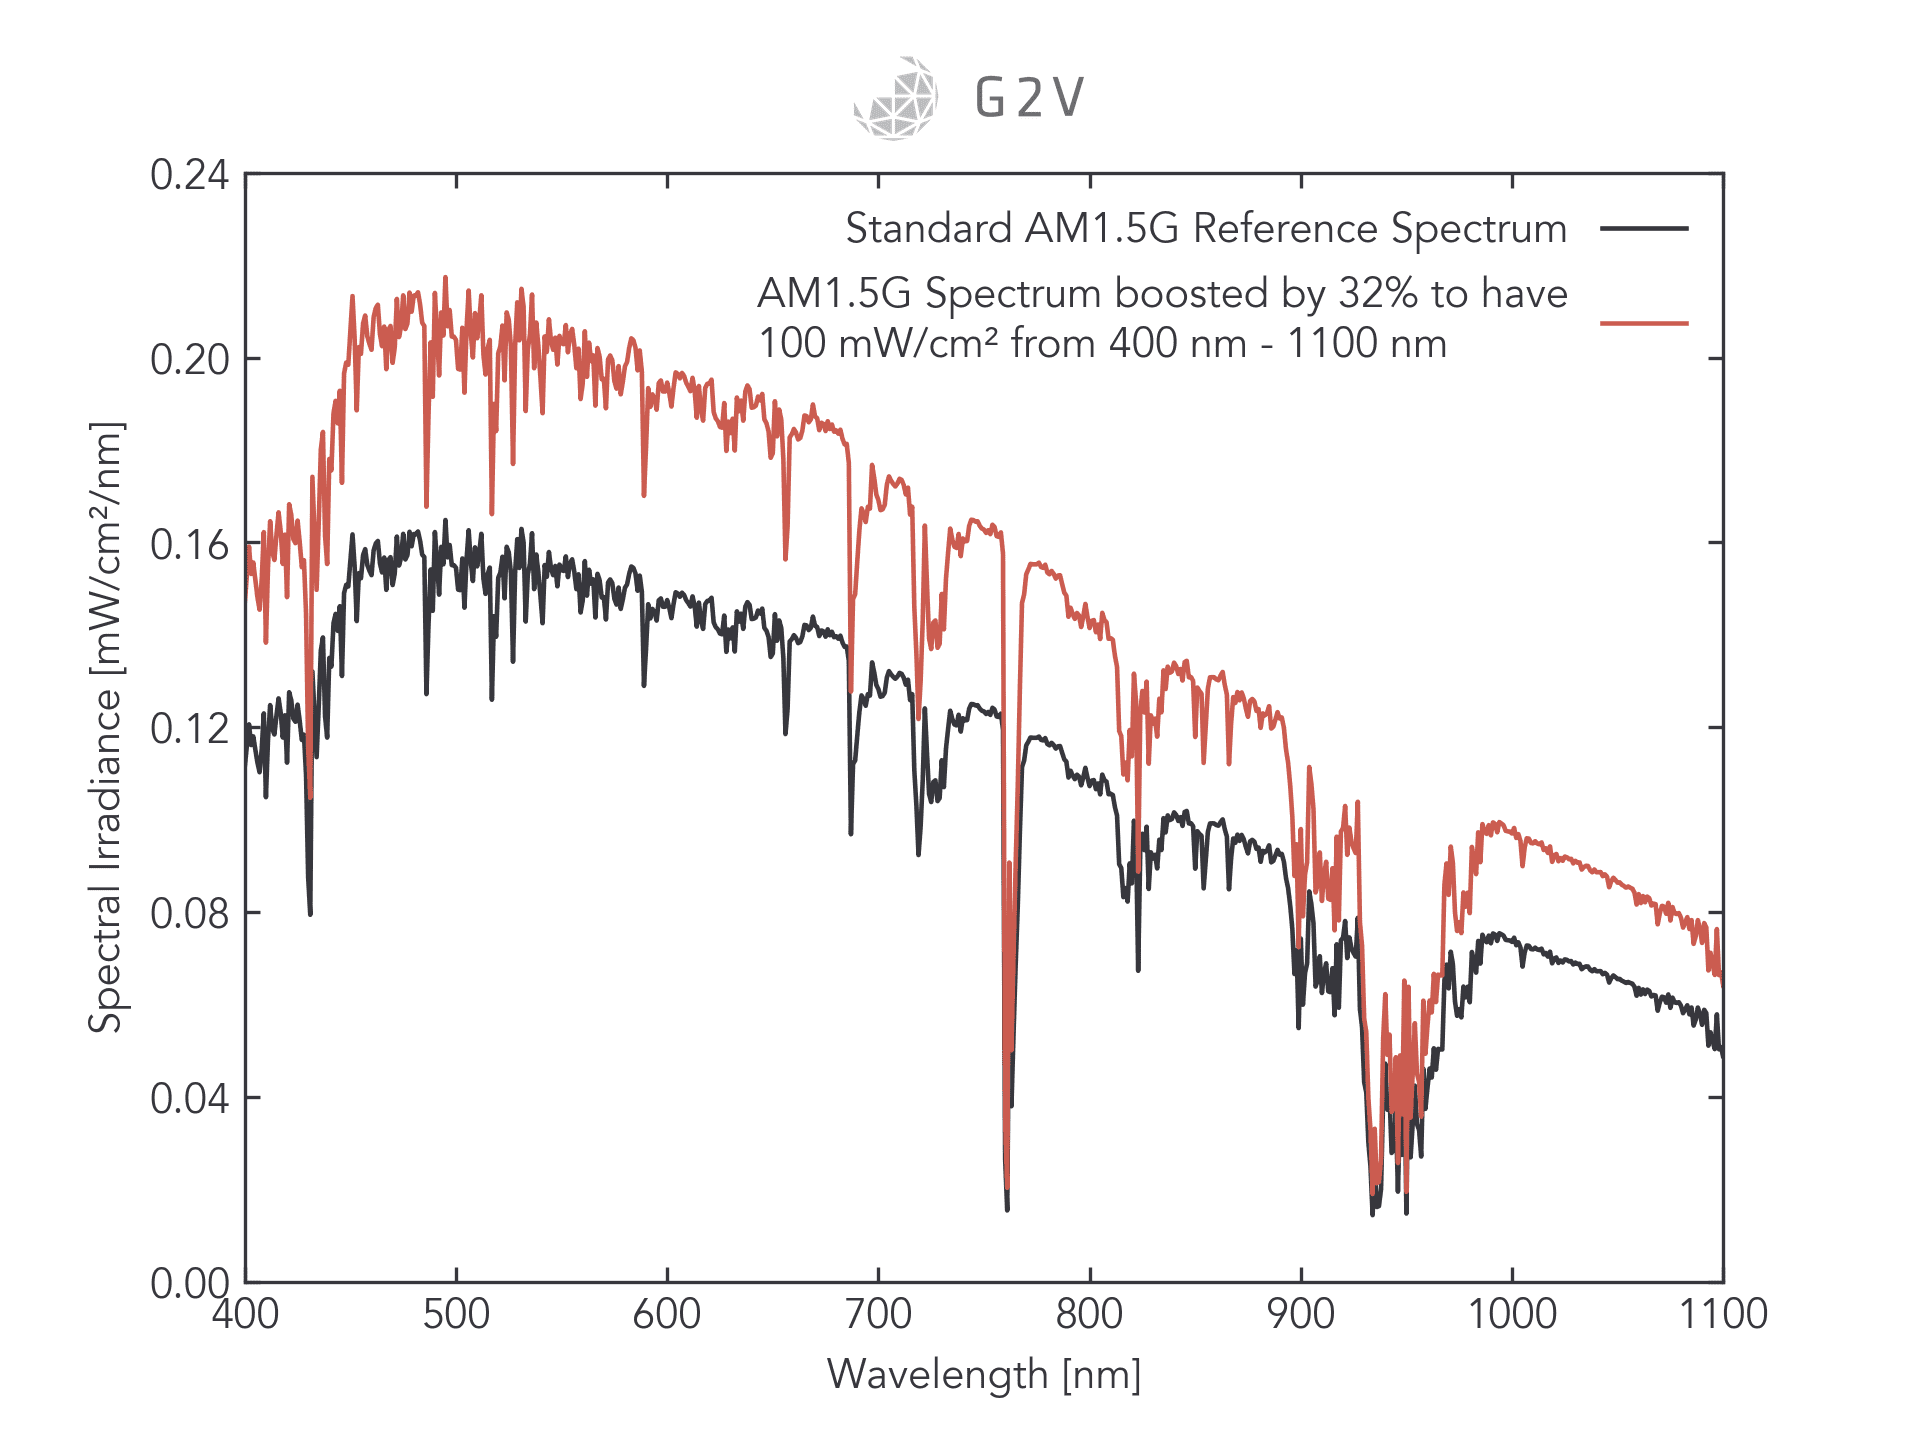 This plot shows how incorrect the spectrum from 400 nm to 1100 nm would be compared to the standard AM1.5G spectrum if one were to boost the irradiance in this range in order to achieve the often-cited 100 mW/cm2 target. 